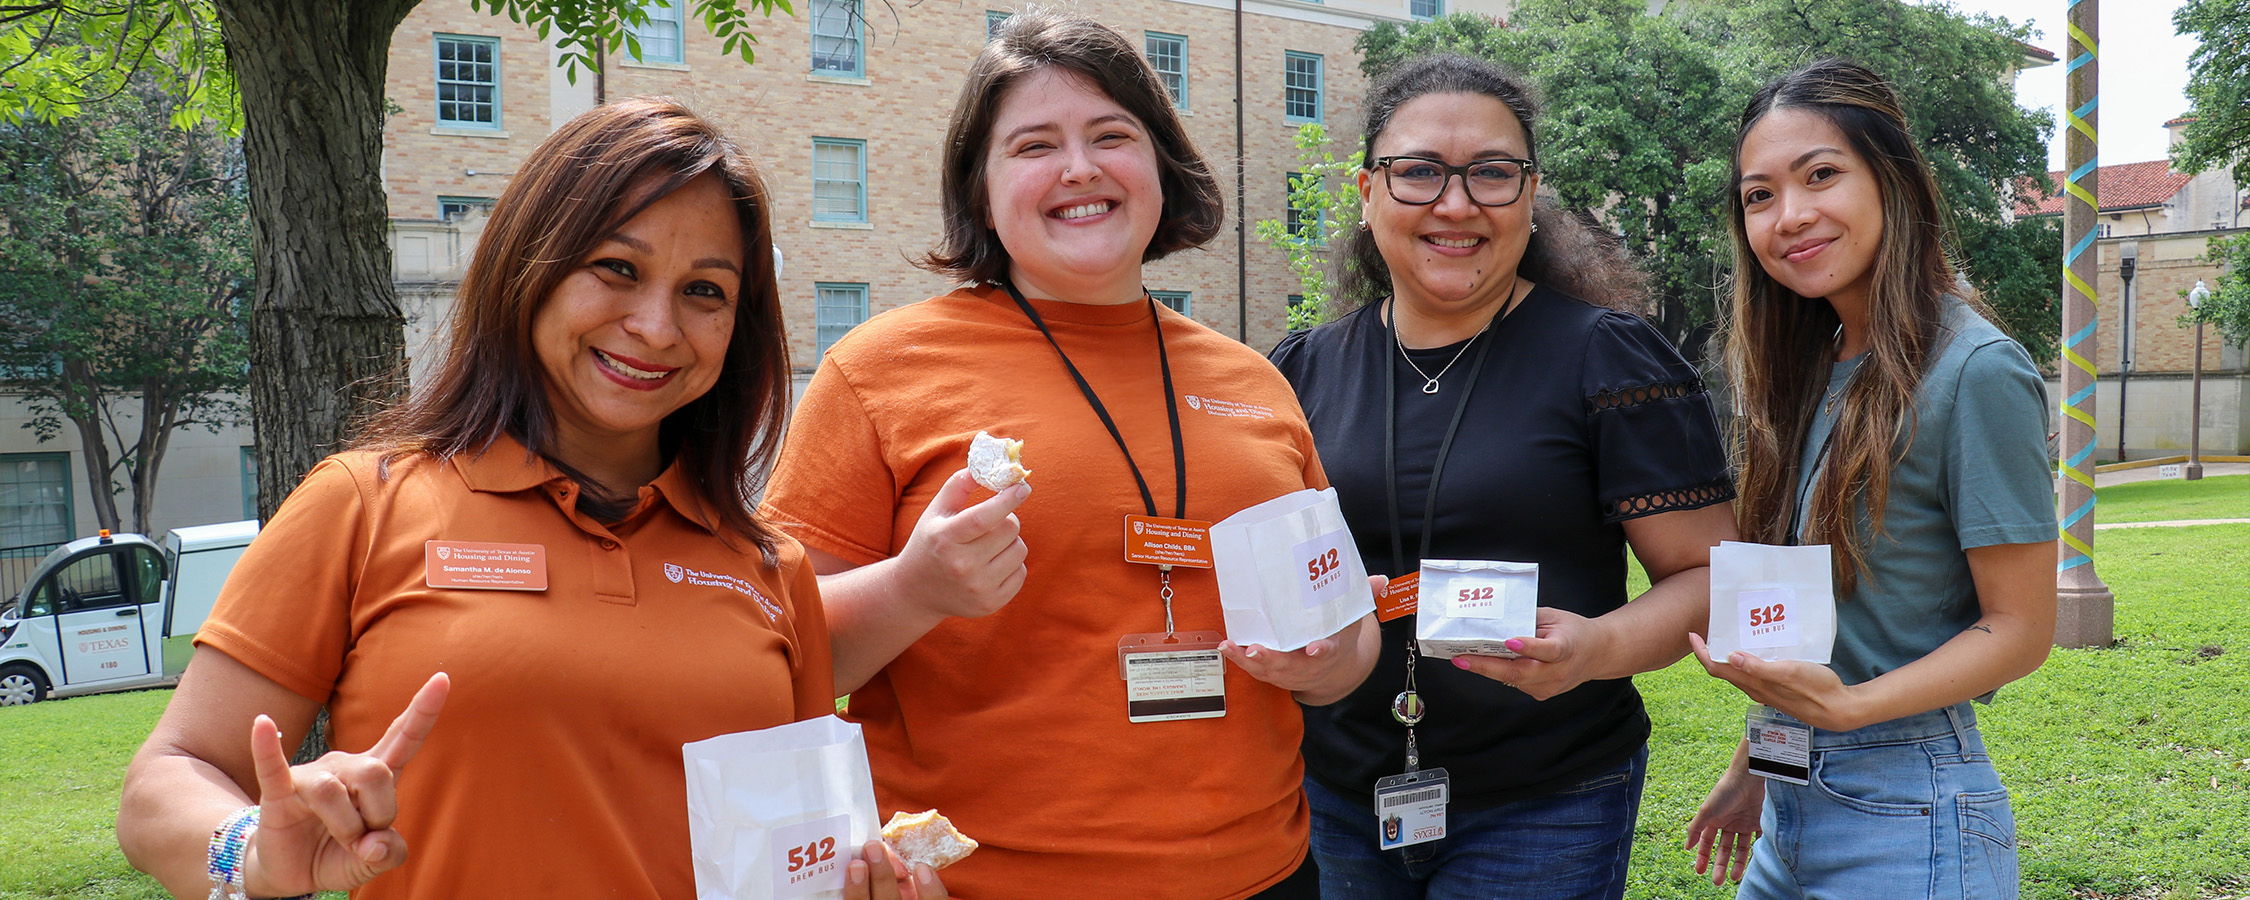 Four UHD staff members pose with bags of beignets in the Honors Quad courtyard